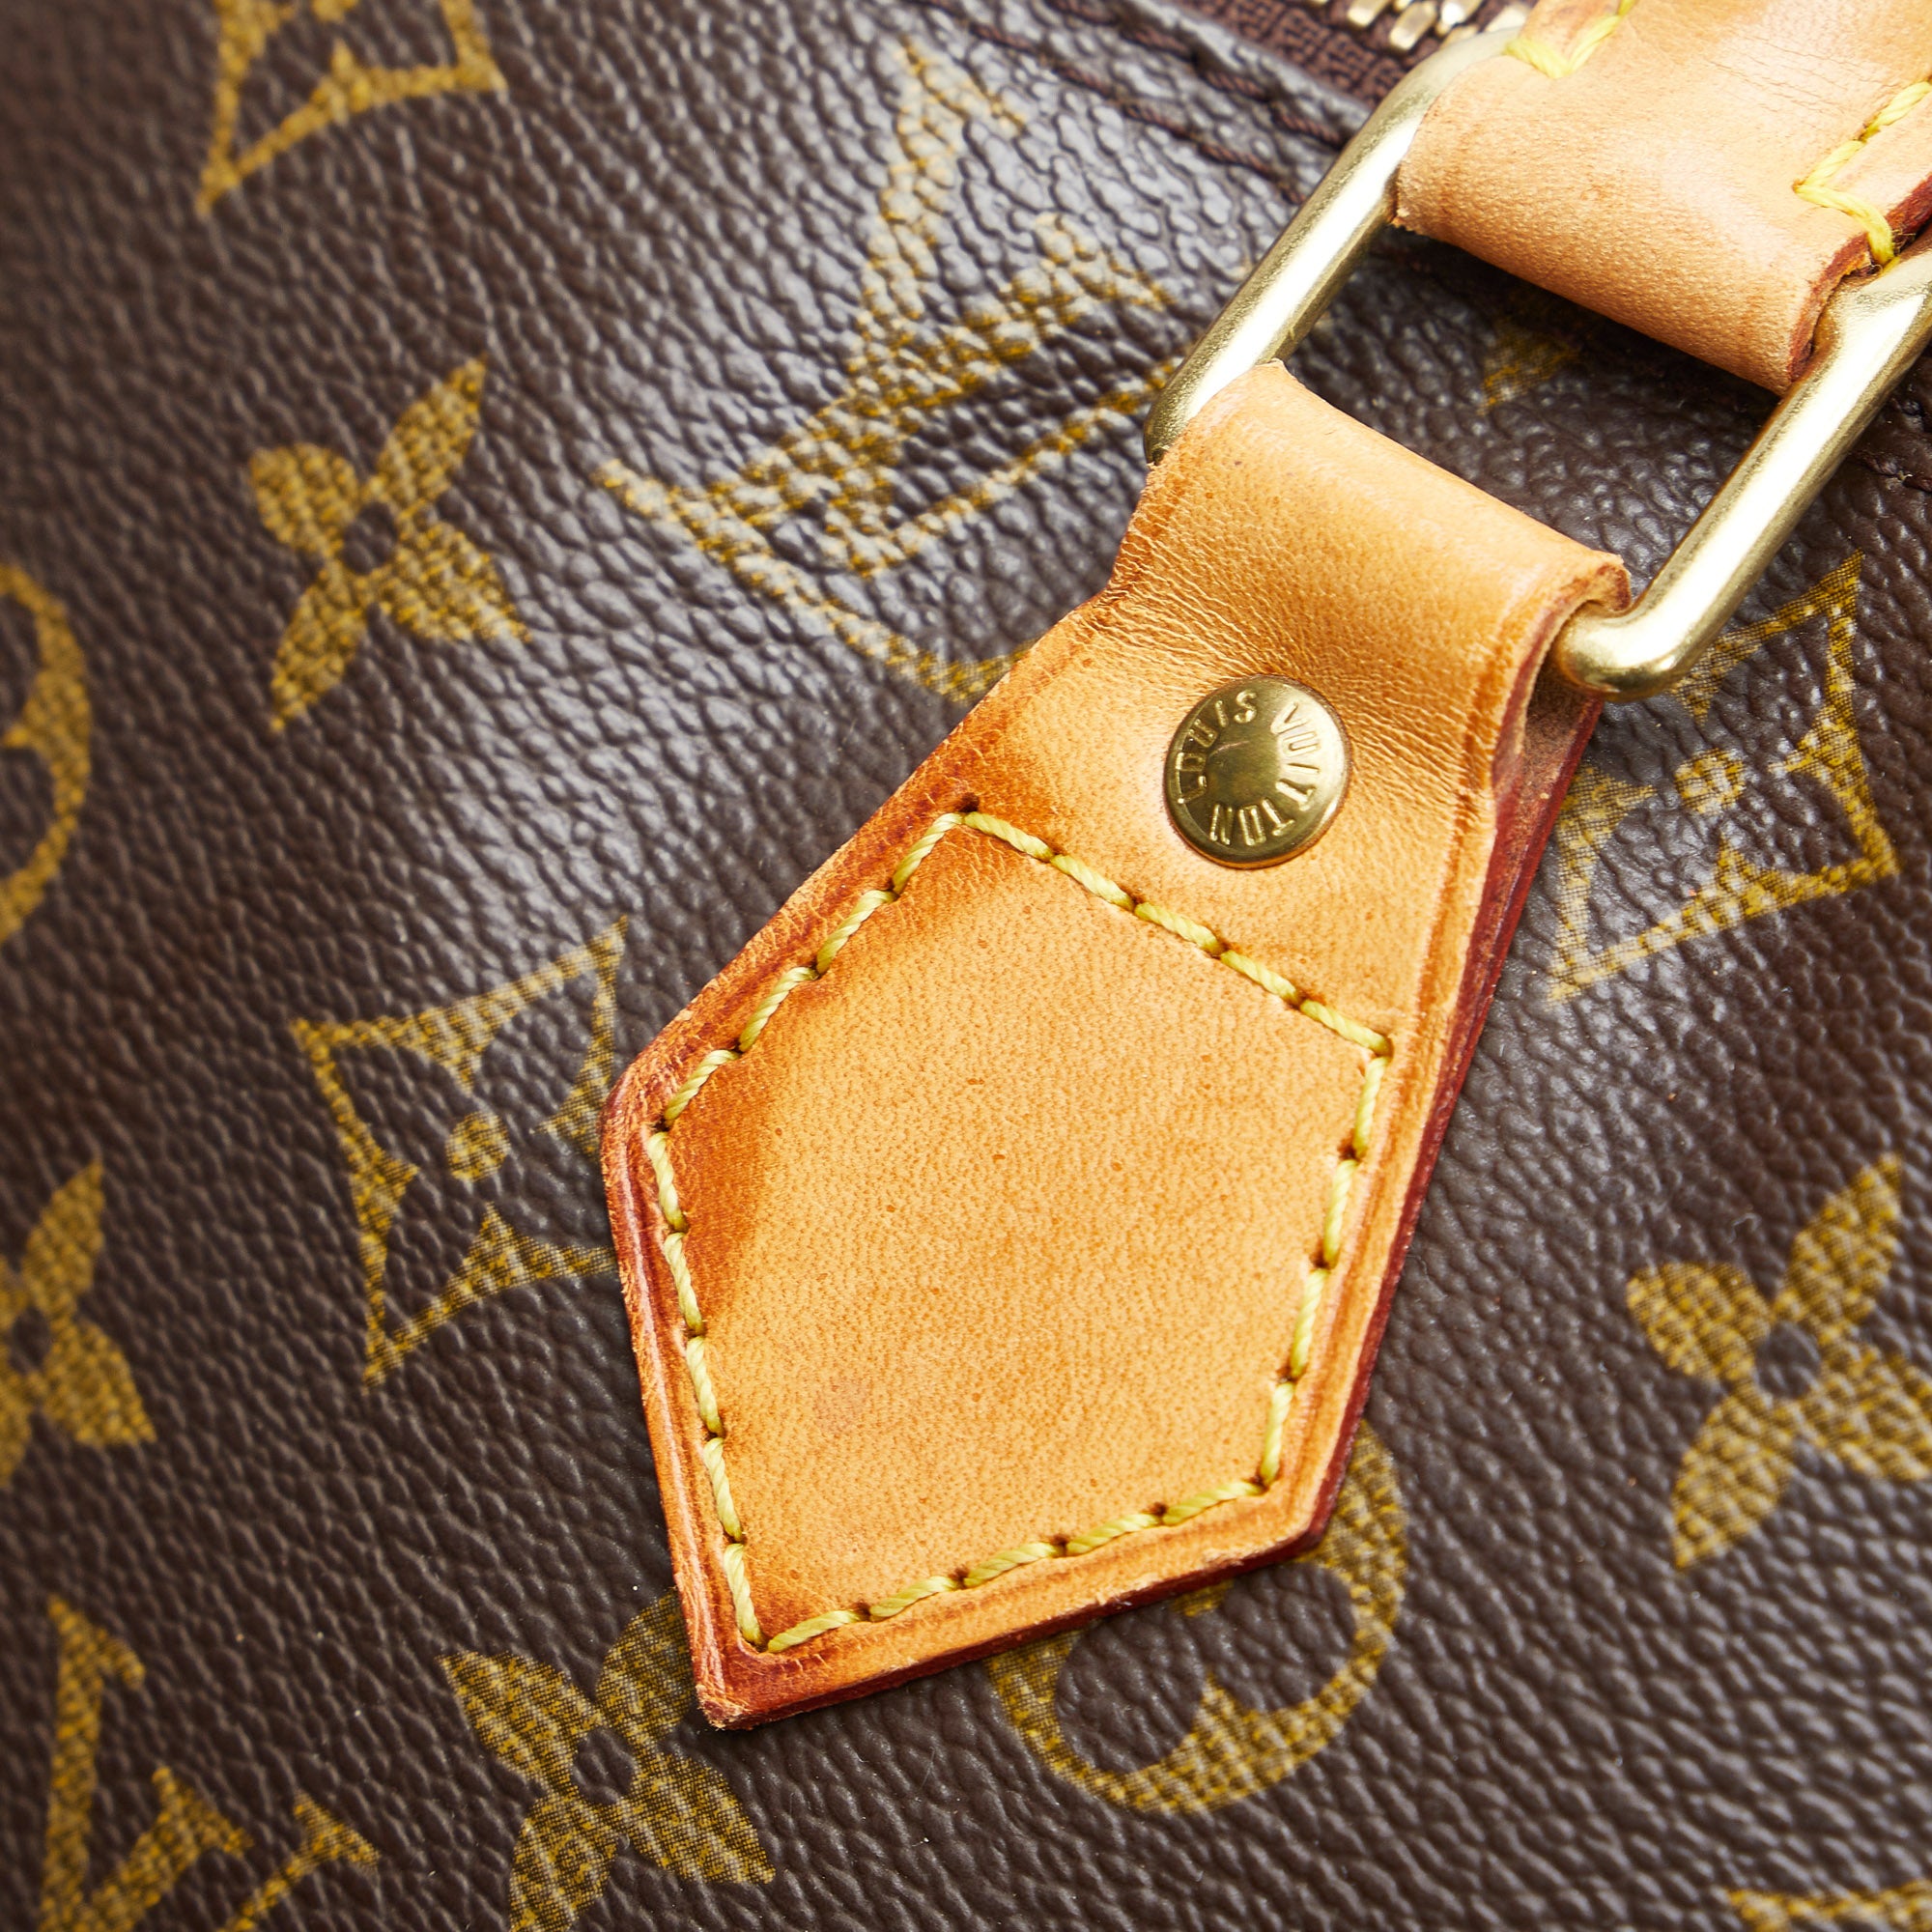 Shop for Louis Vuitton Monogram Canvas Leather Alma MM Handbag - Shipped  from USA